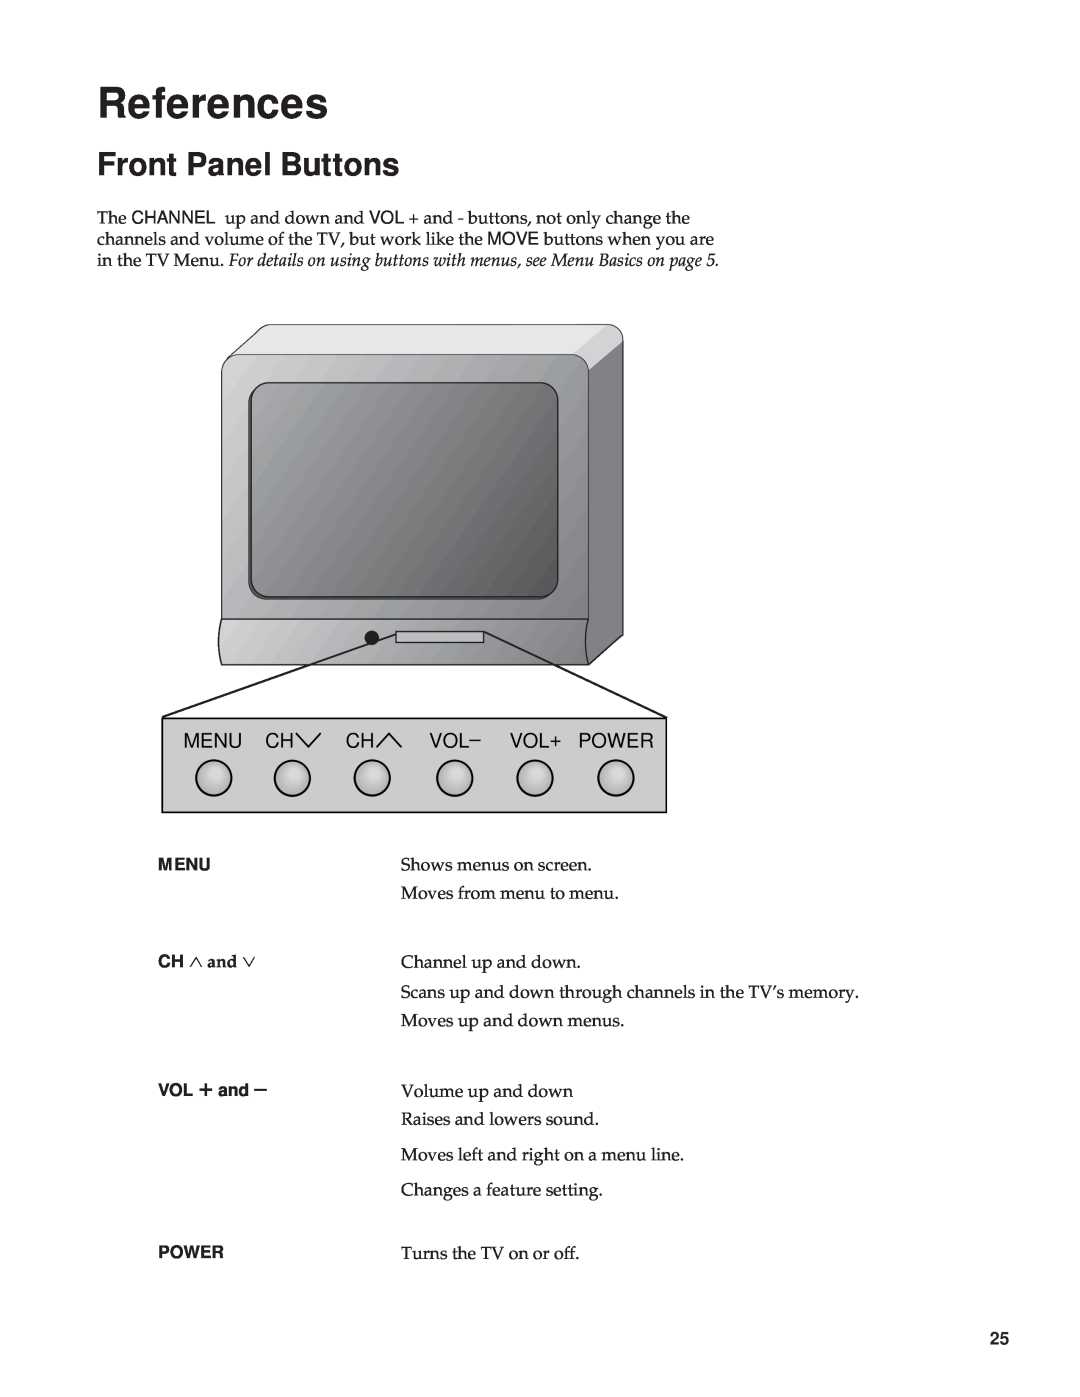 RCA Color TV manual References, Front Panel Buttons, Menu Ch Ch Vol- Vol+ Power, CH 2 and, VOL + and 